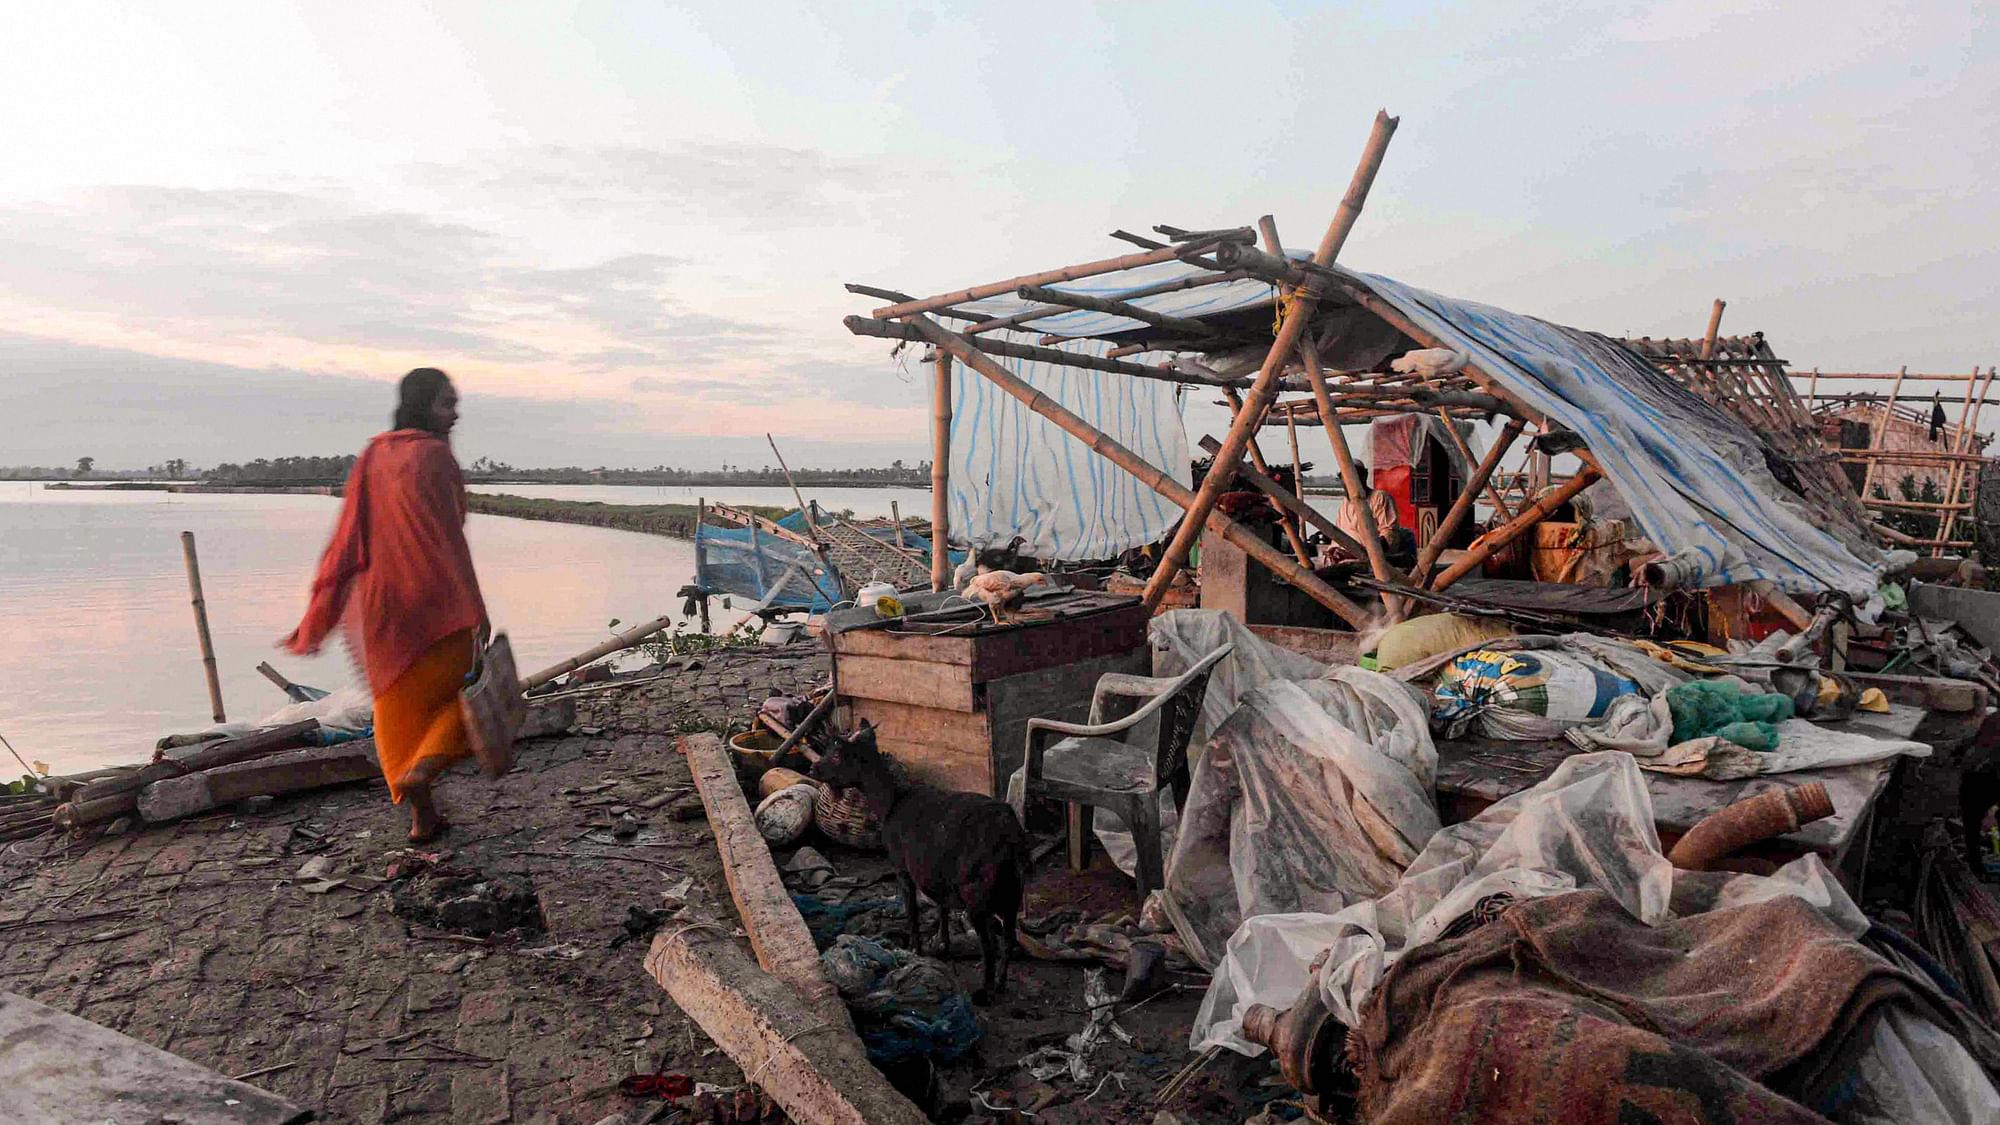 A villager walks past a damaged house, in the aftermath of Cyclone Amphan, in South 24 Paraganas district of West Bengal, Friday, May 22, 2020.